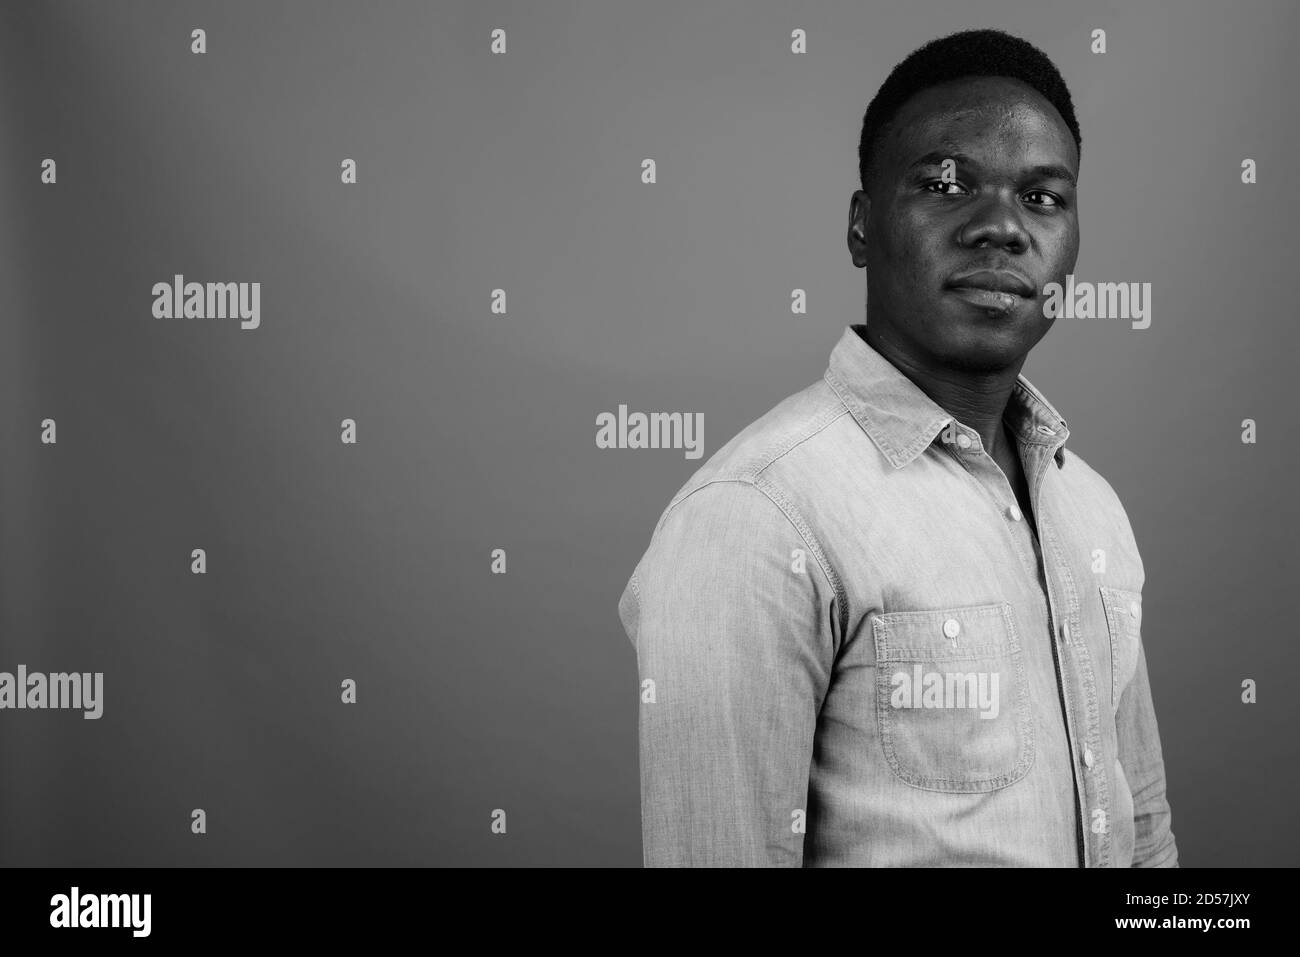 Young African man wearing denim shirt against gray background Stock Photo